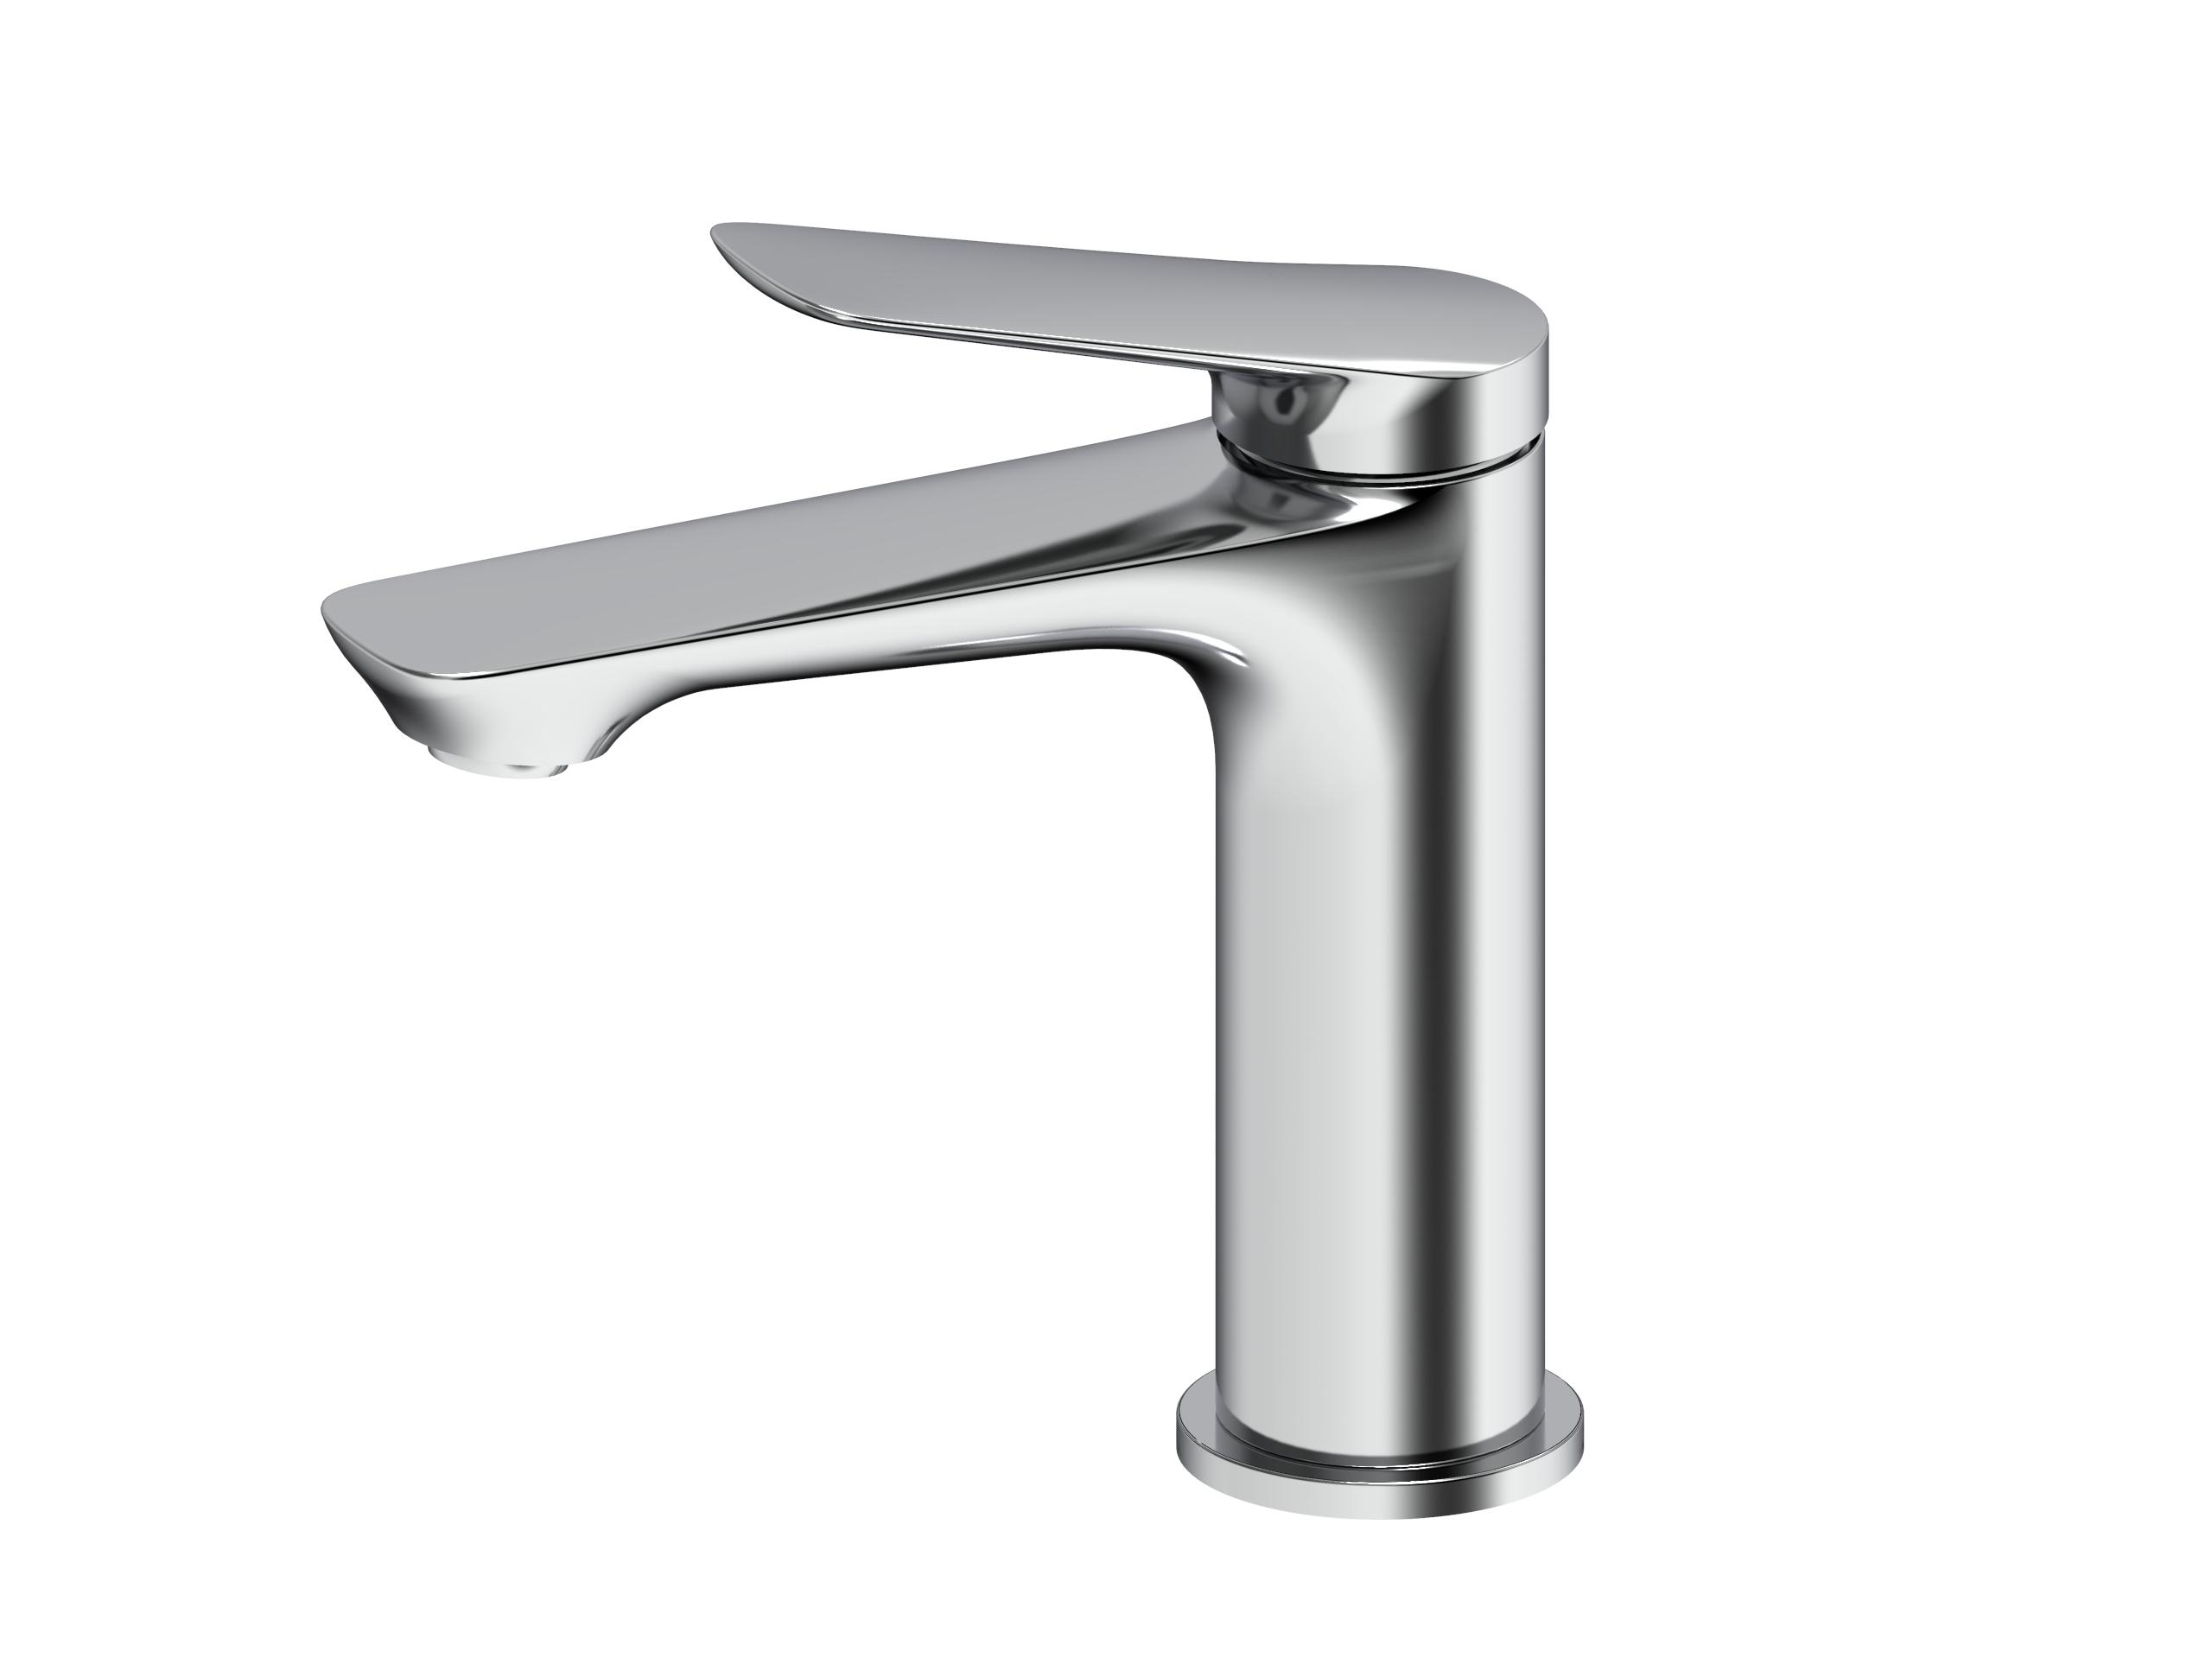 How do brass basin faucets compare to other materials in terms of durability?